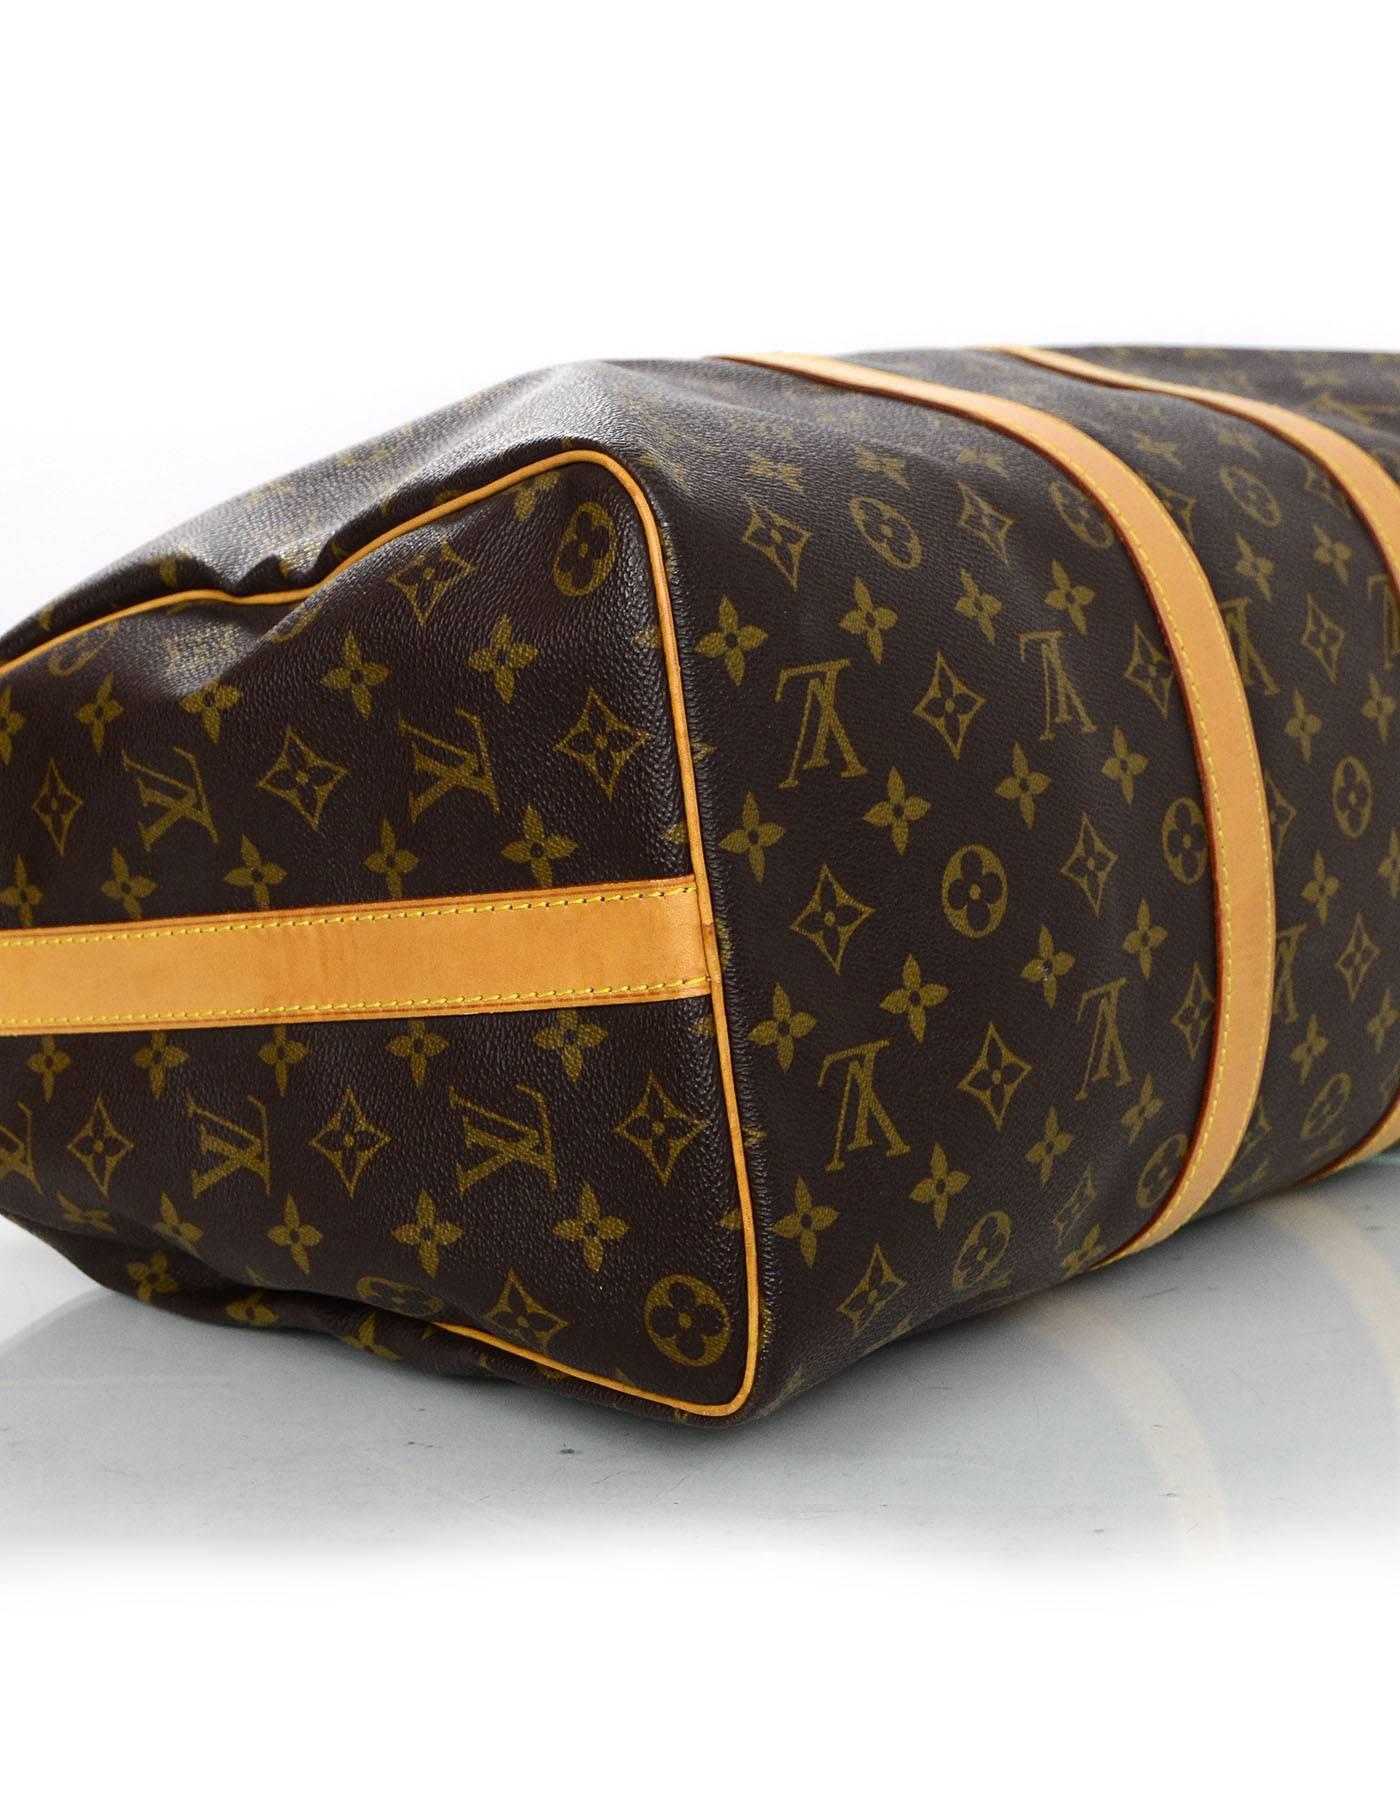 Louis Vuitton Monogram Keepall Bandouliere 45 Duffle Bag In Excellent Condition In New York, NY